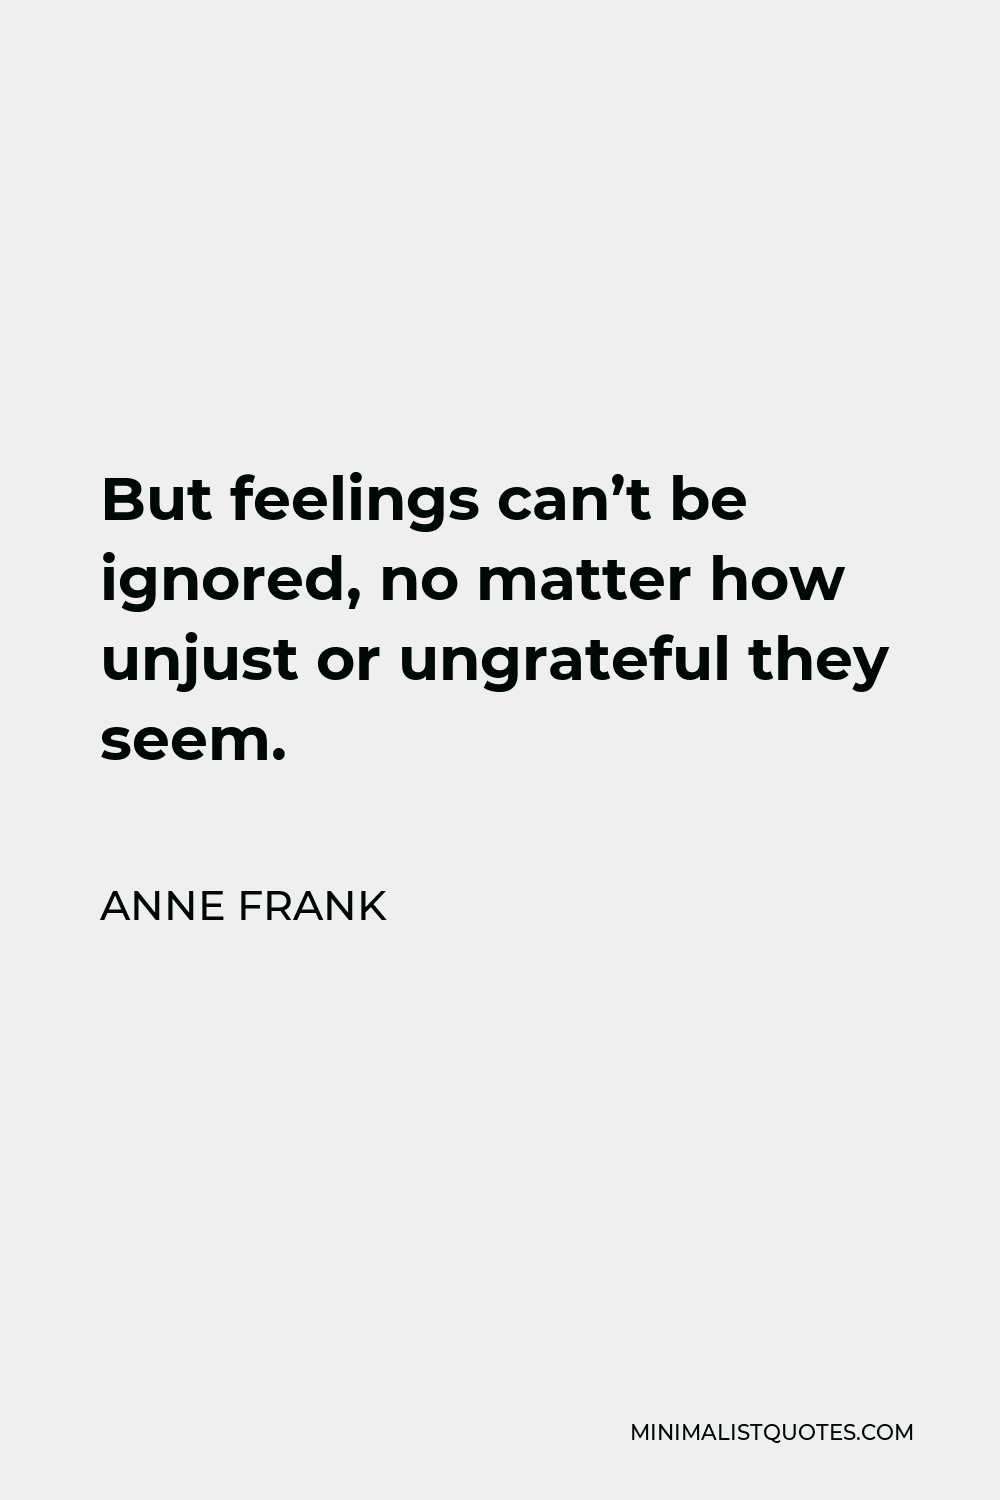 Anne Frank Quote: But feelings can't be ignored, no matter how unjust ...